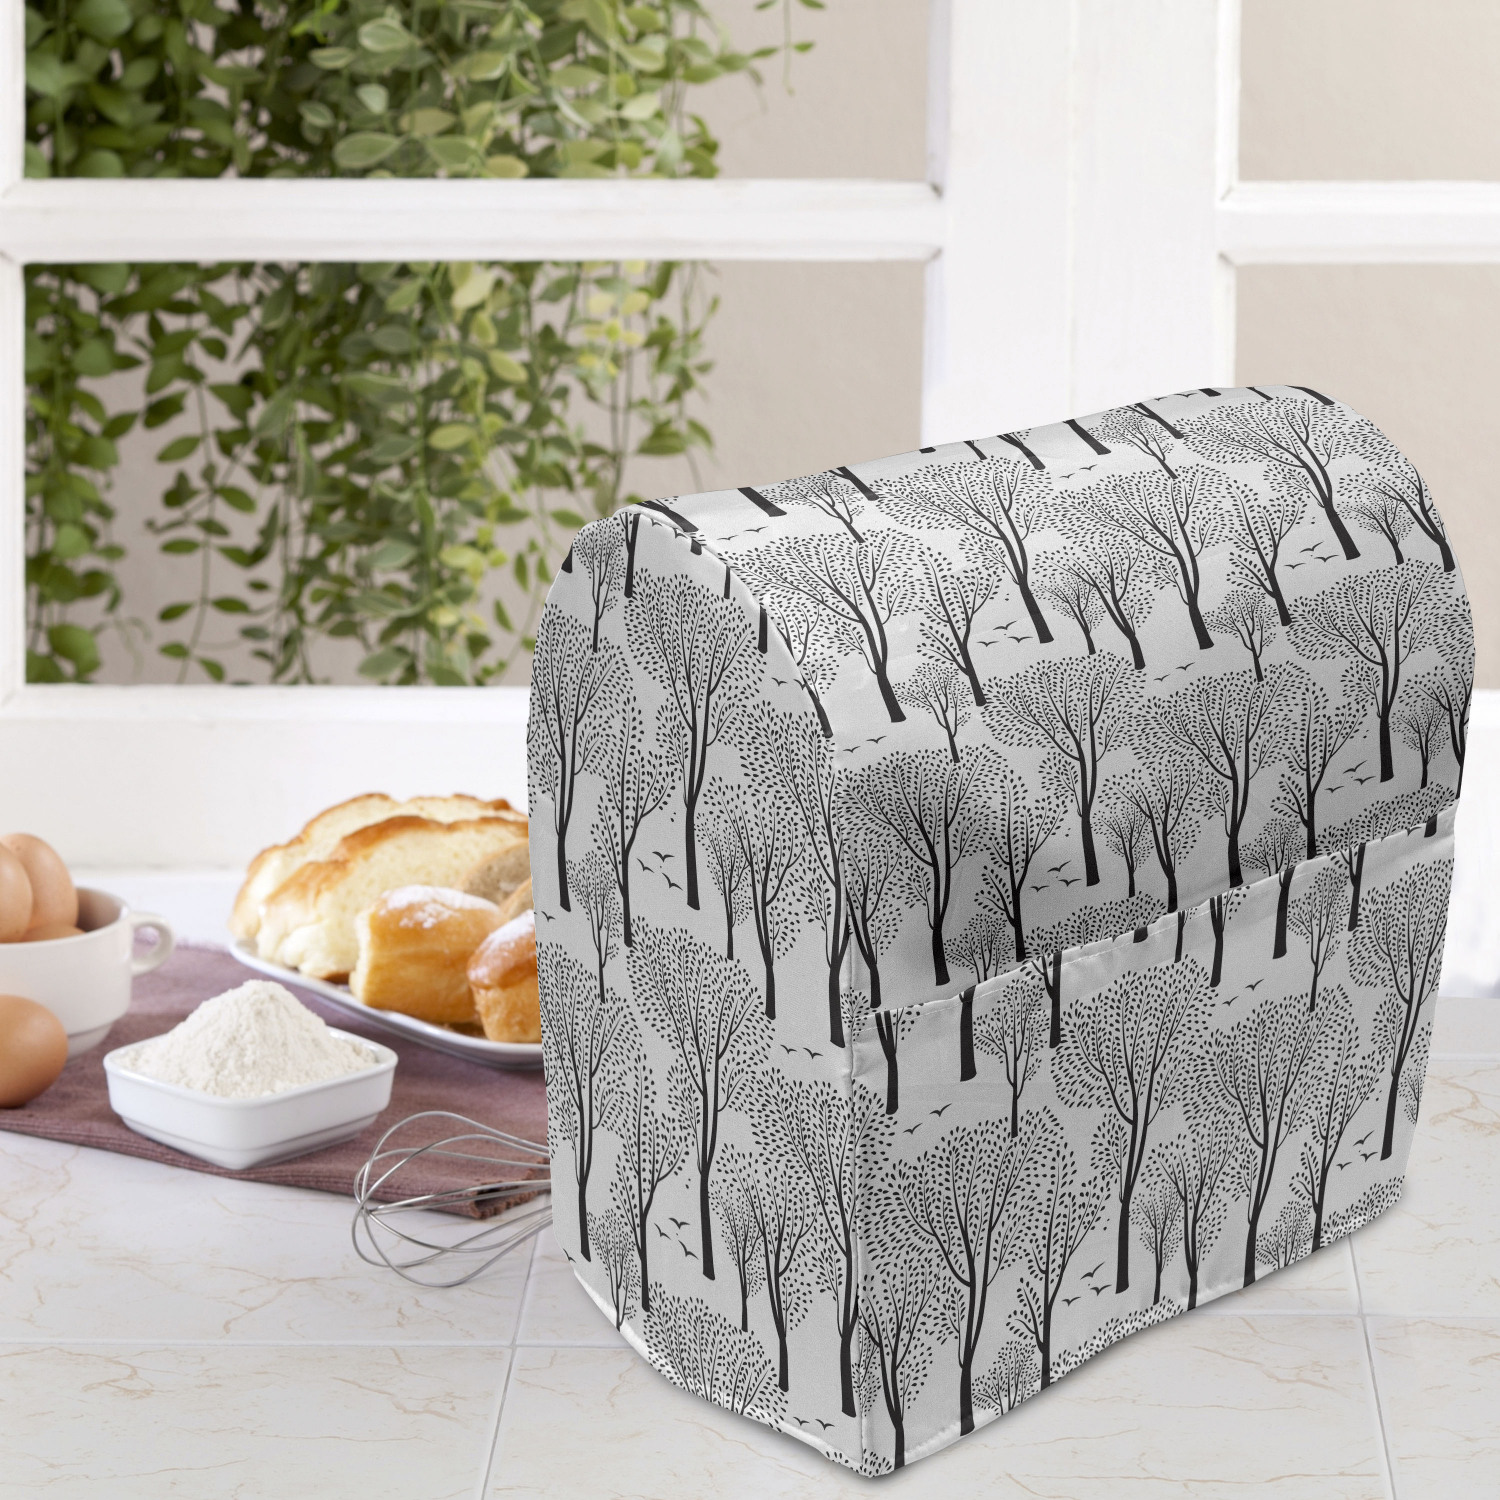 Winter Stand Mixer Cover, Monochrome Abstract Forest Pattern Trees Leaves Birds Wildlife Woodland Nature, Kitchen Appliance Organizer Bag Cover with Pockets, 5 Quarts, Black White, by Ambesonne - image 3 of 4